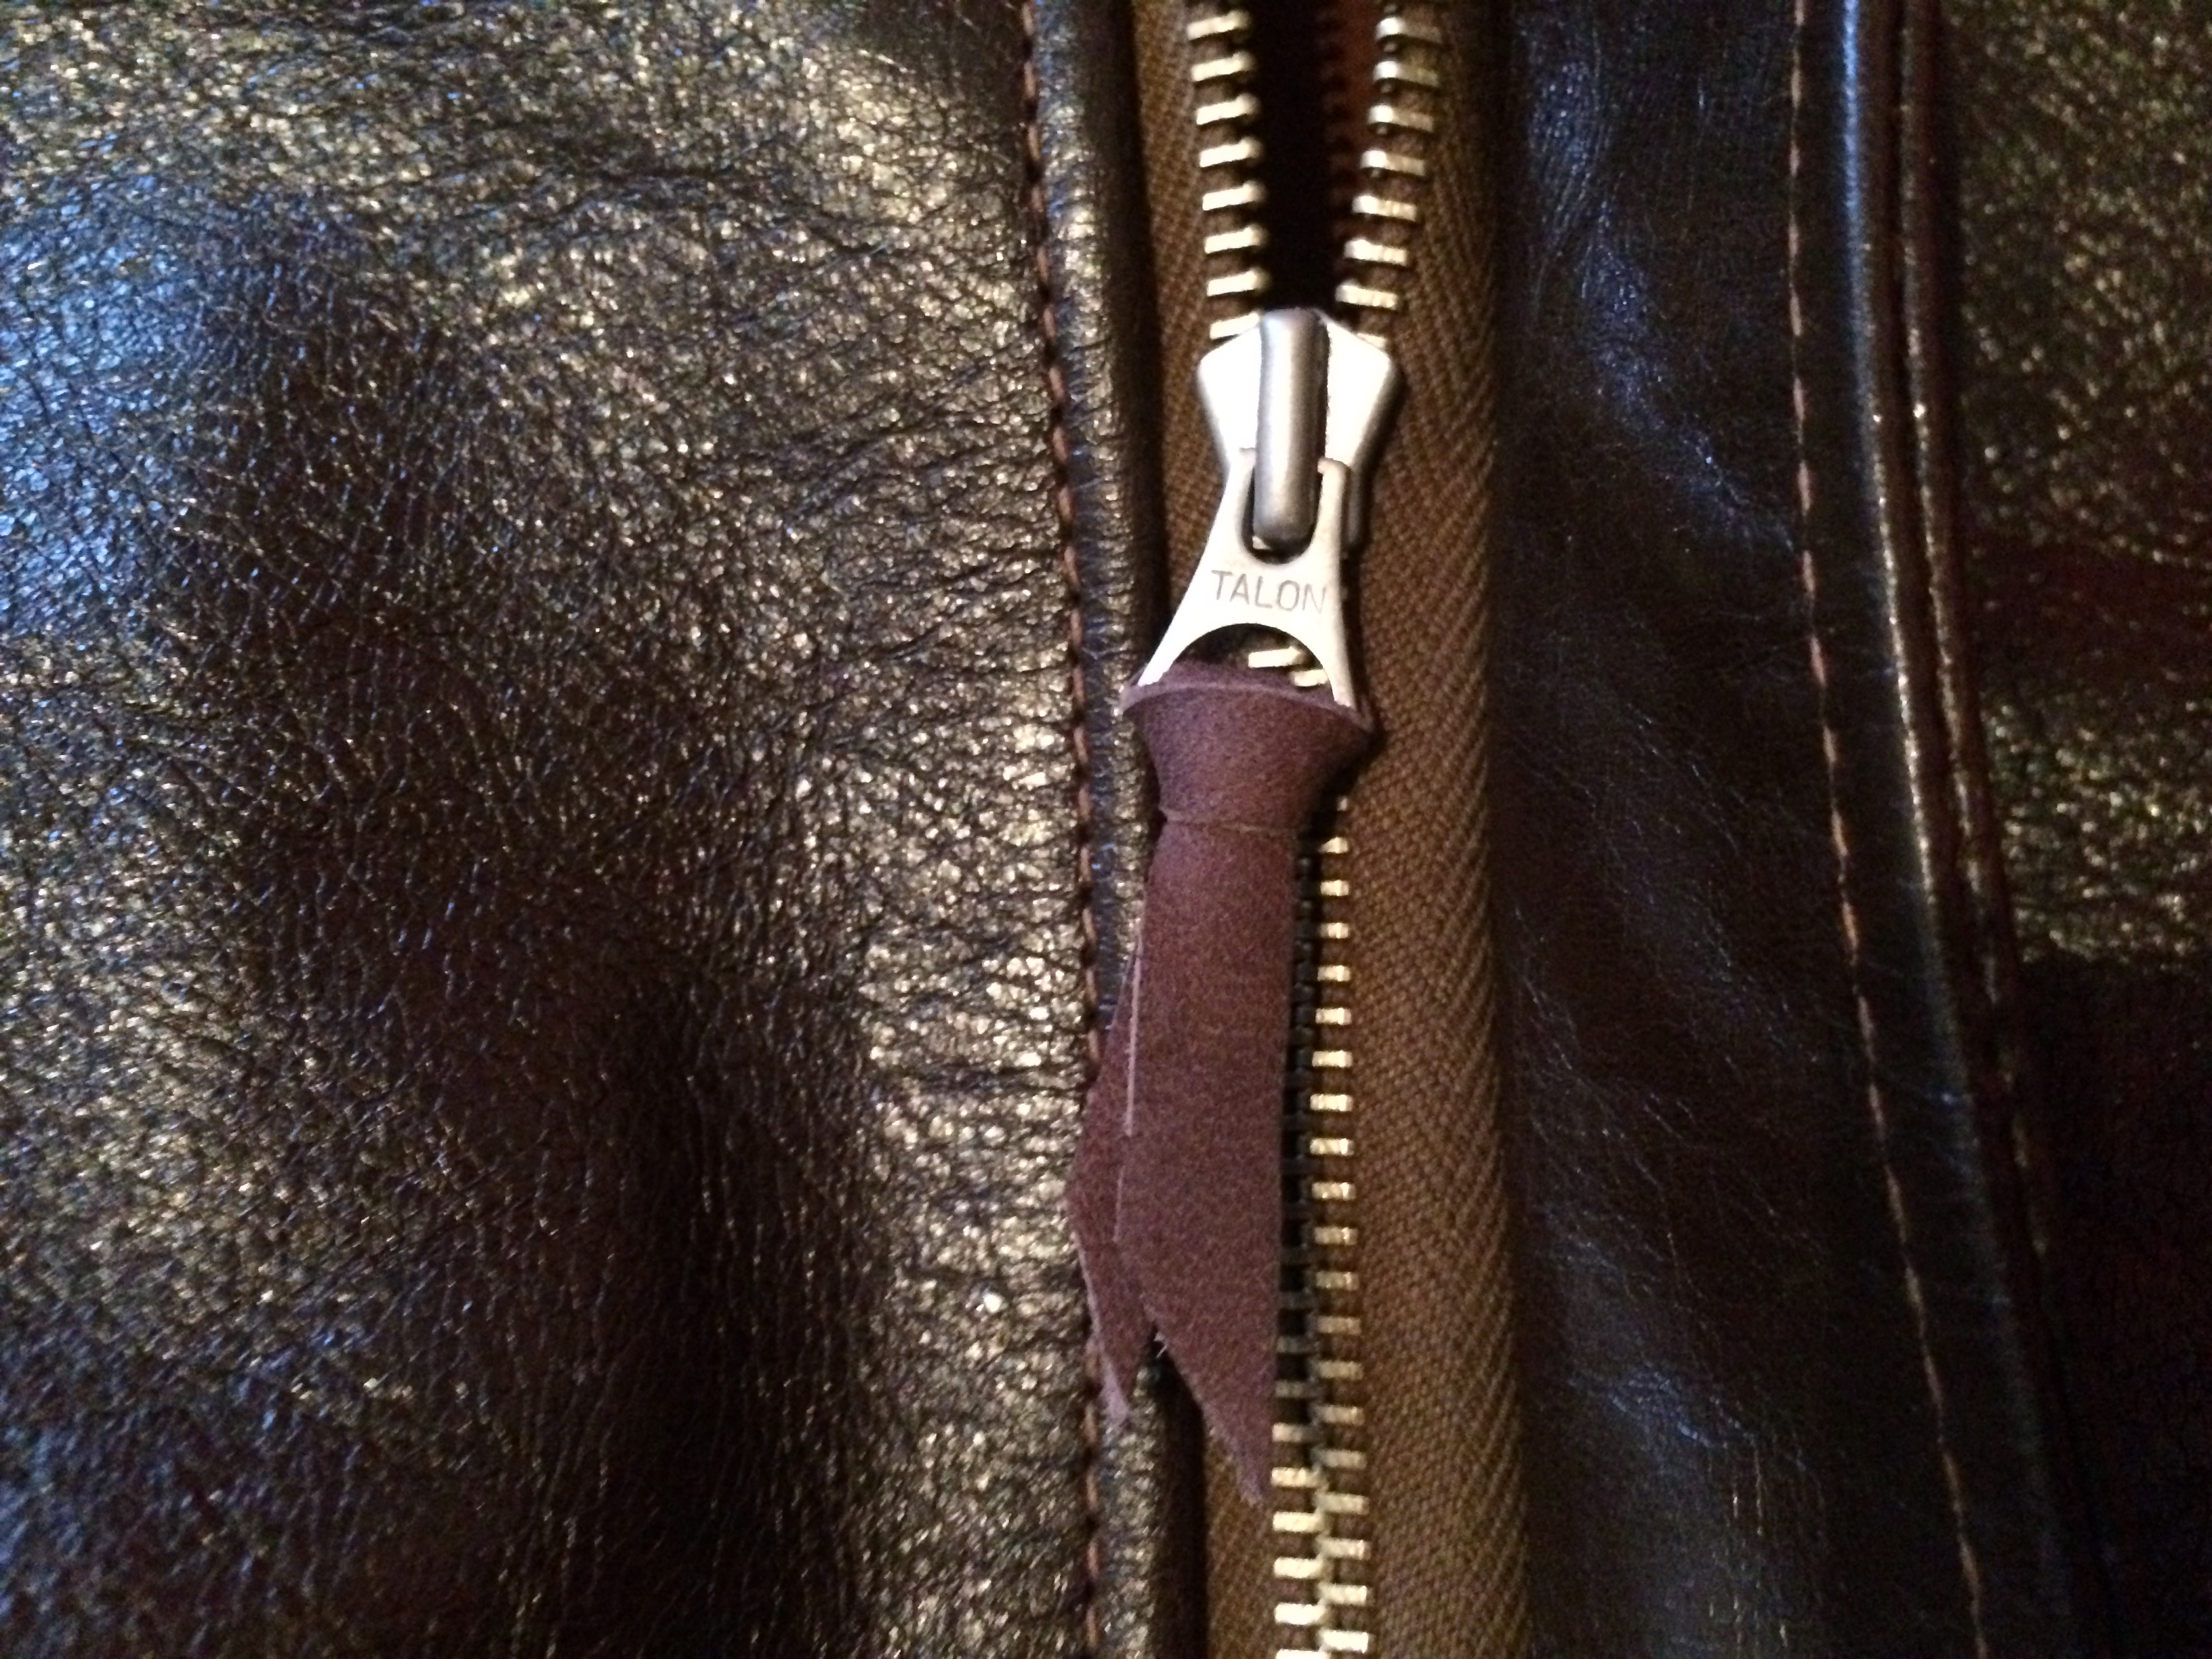 Zipper pullers on A-2 jackets